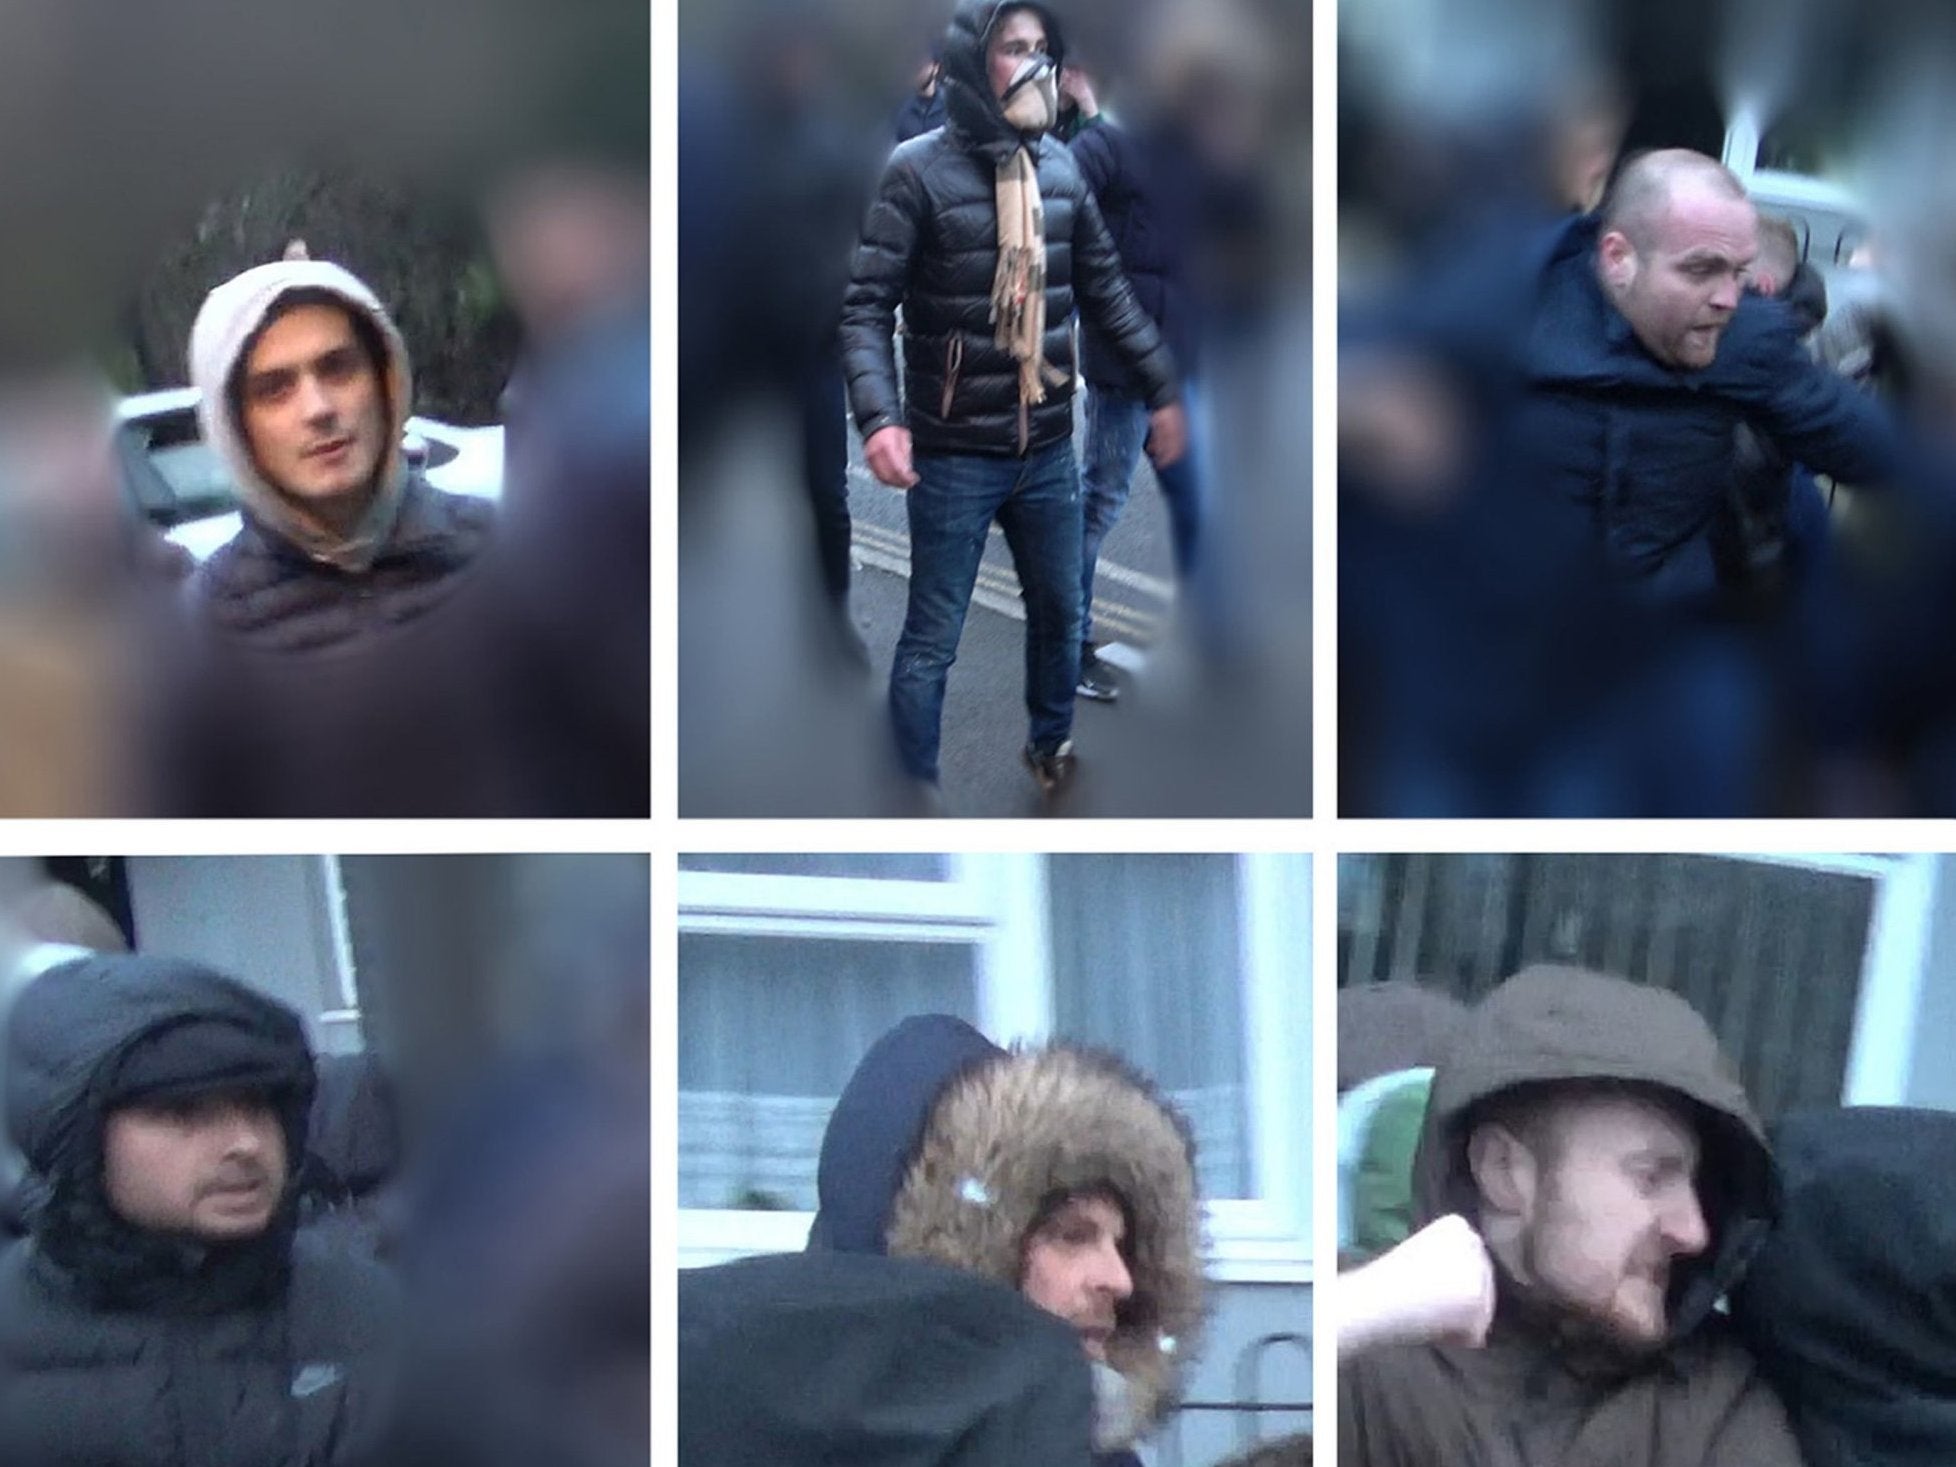 Six of the men police would like to identify